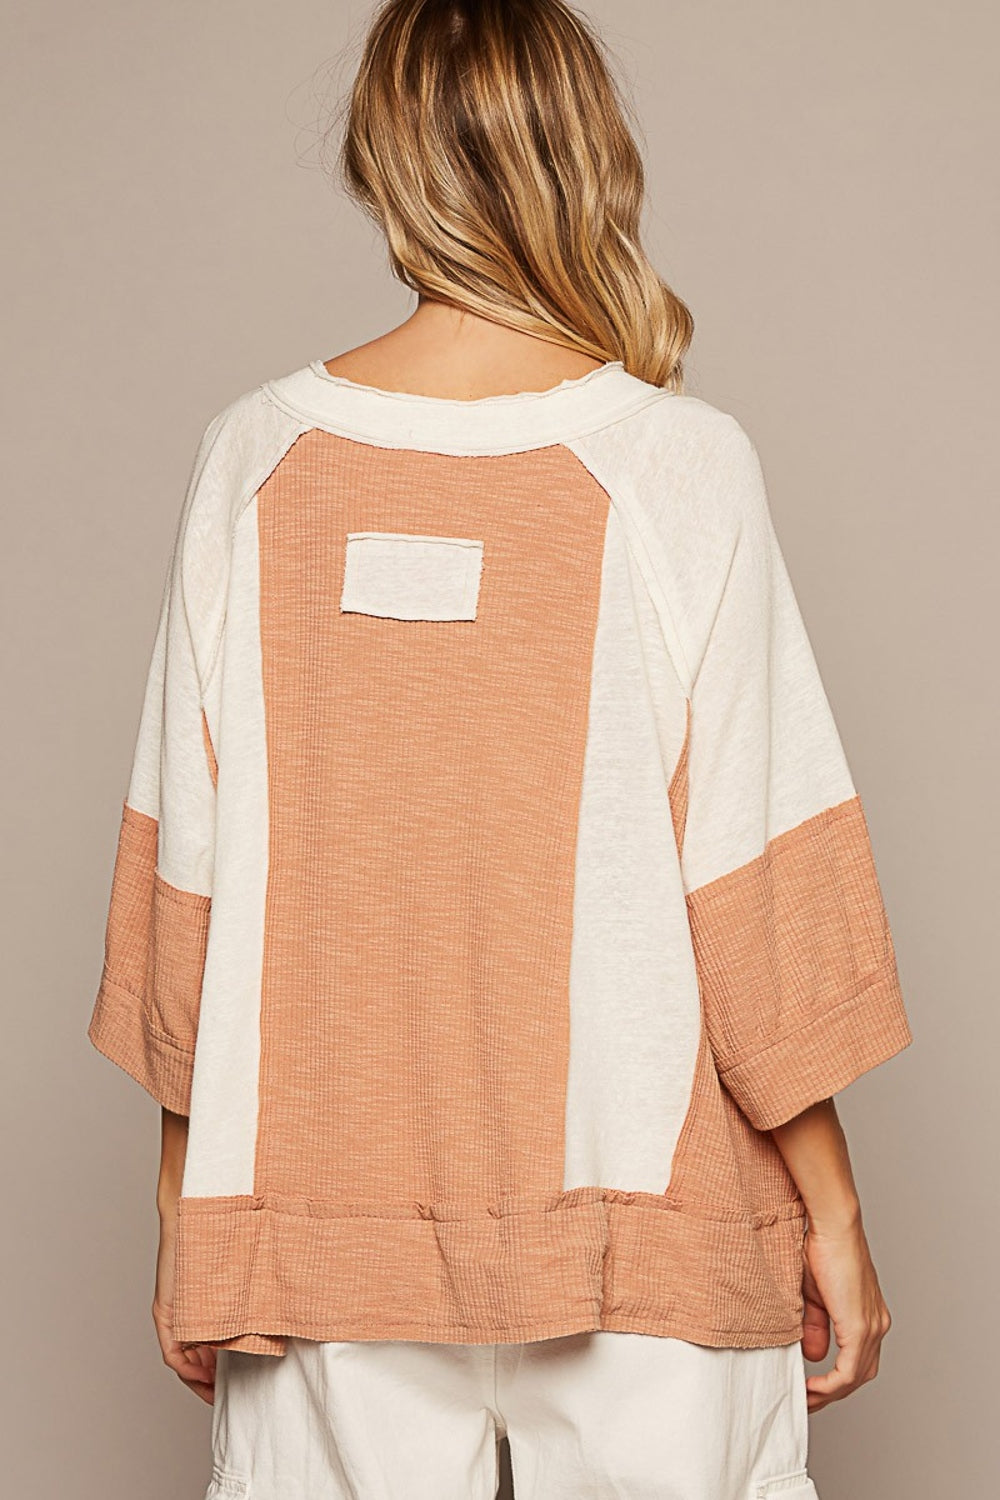 The Wild Notched Frayed Edge Top